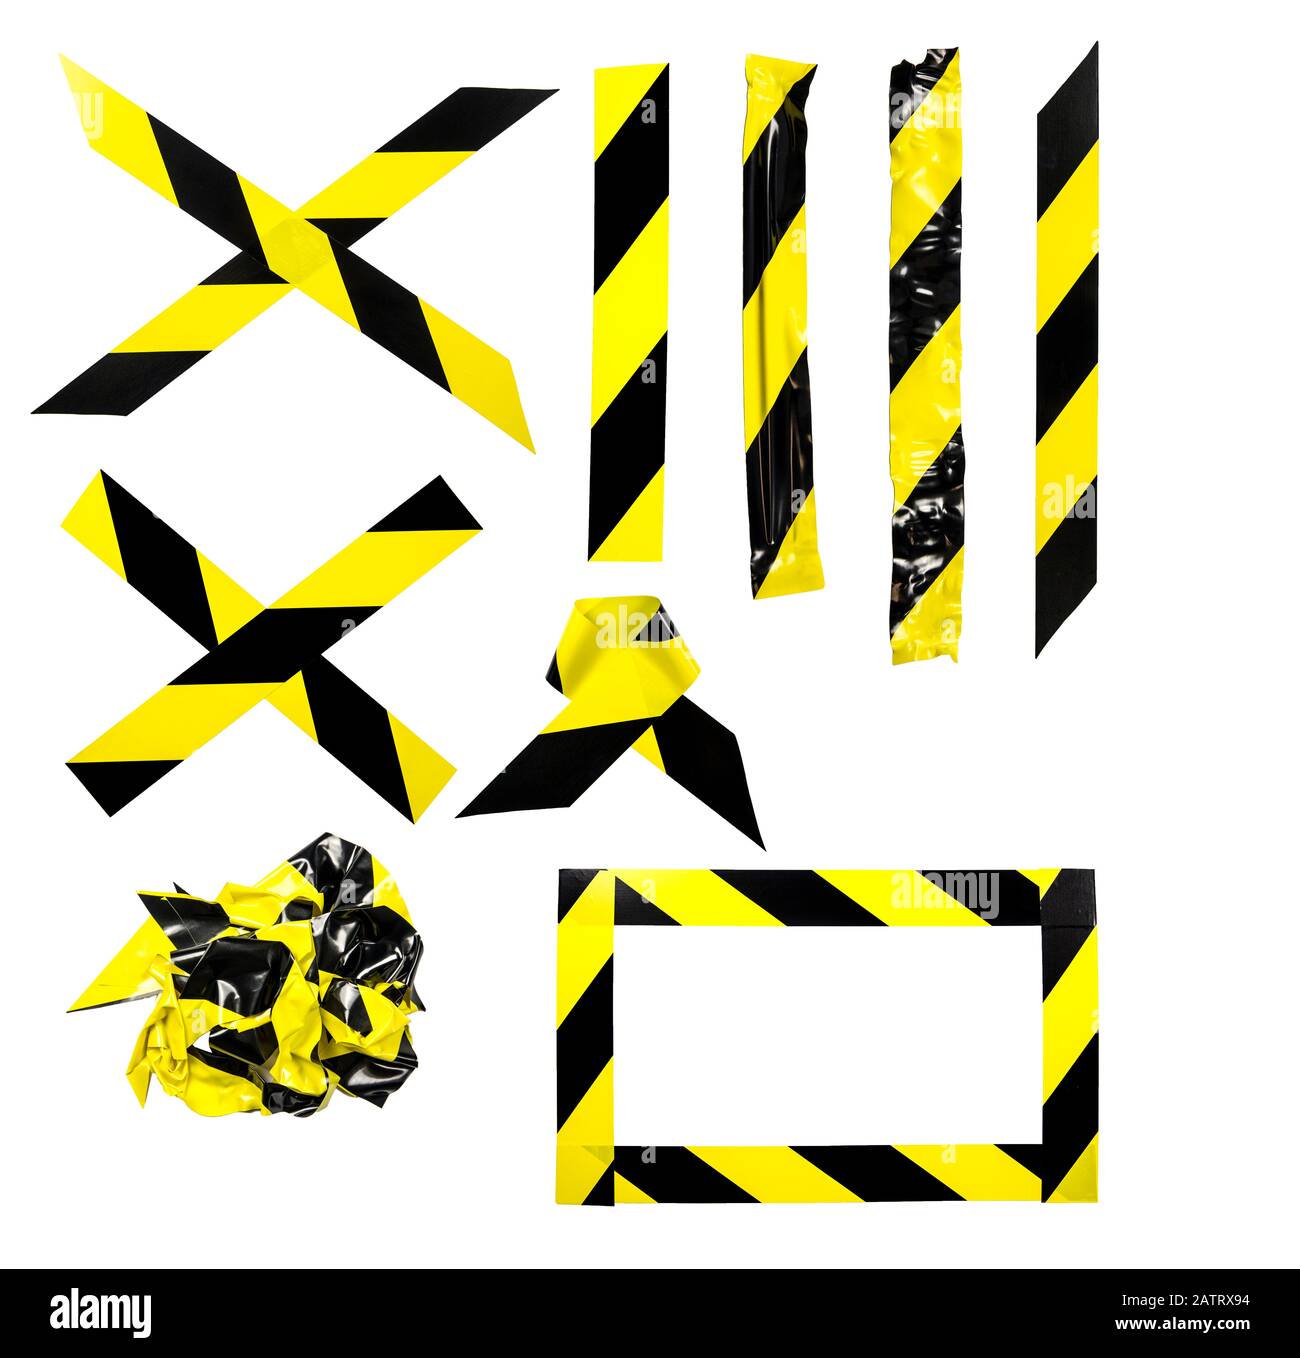 Set of different shape and size yellow black hazard caution tape strips isolated on white background. Flat lay top view. Stock Photo